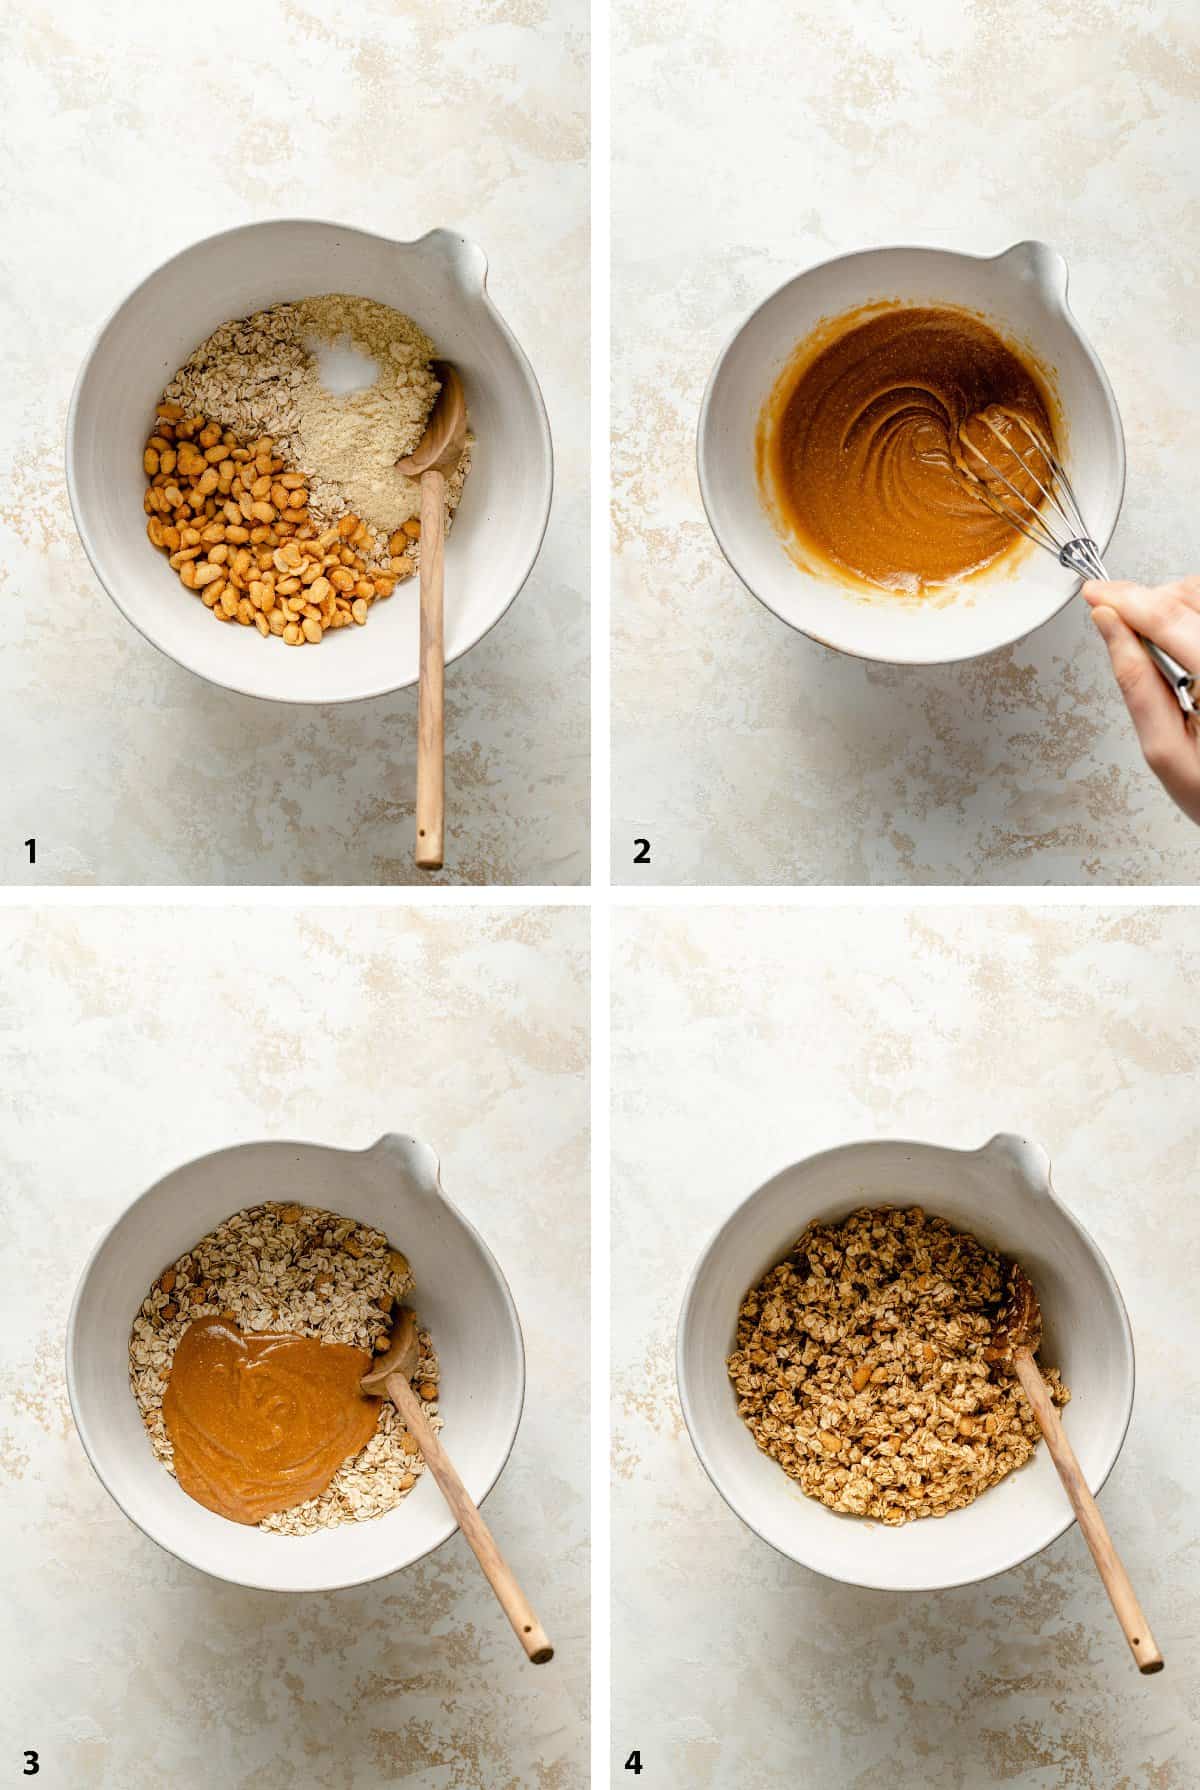 Process steps of making the granola mix.